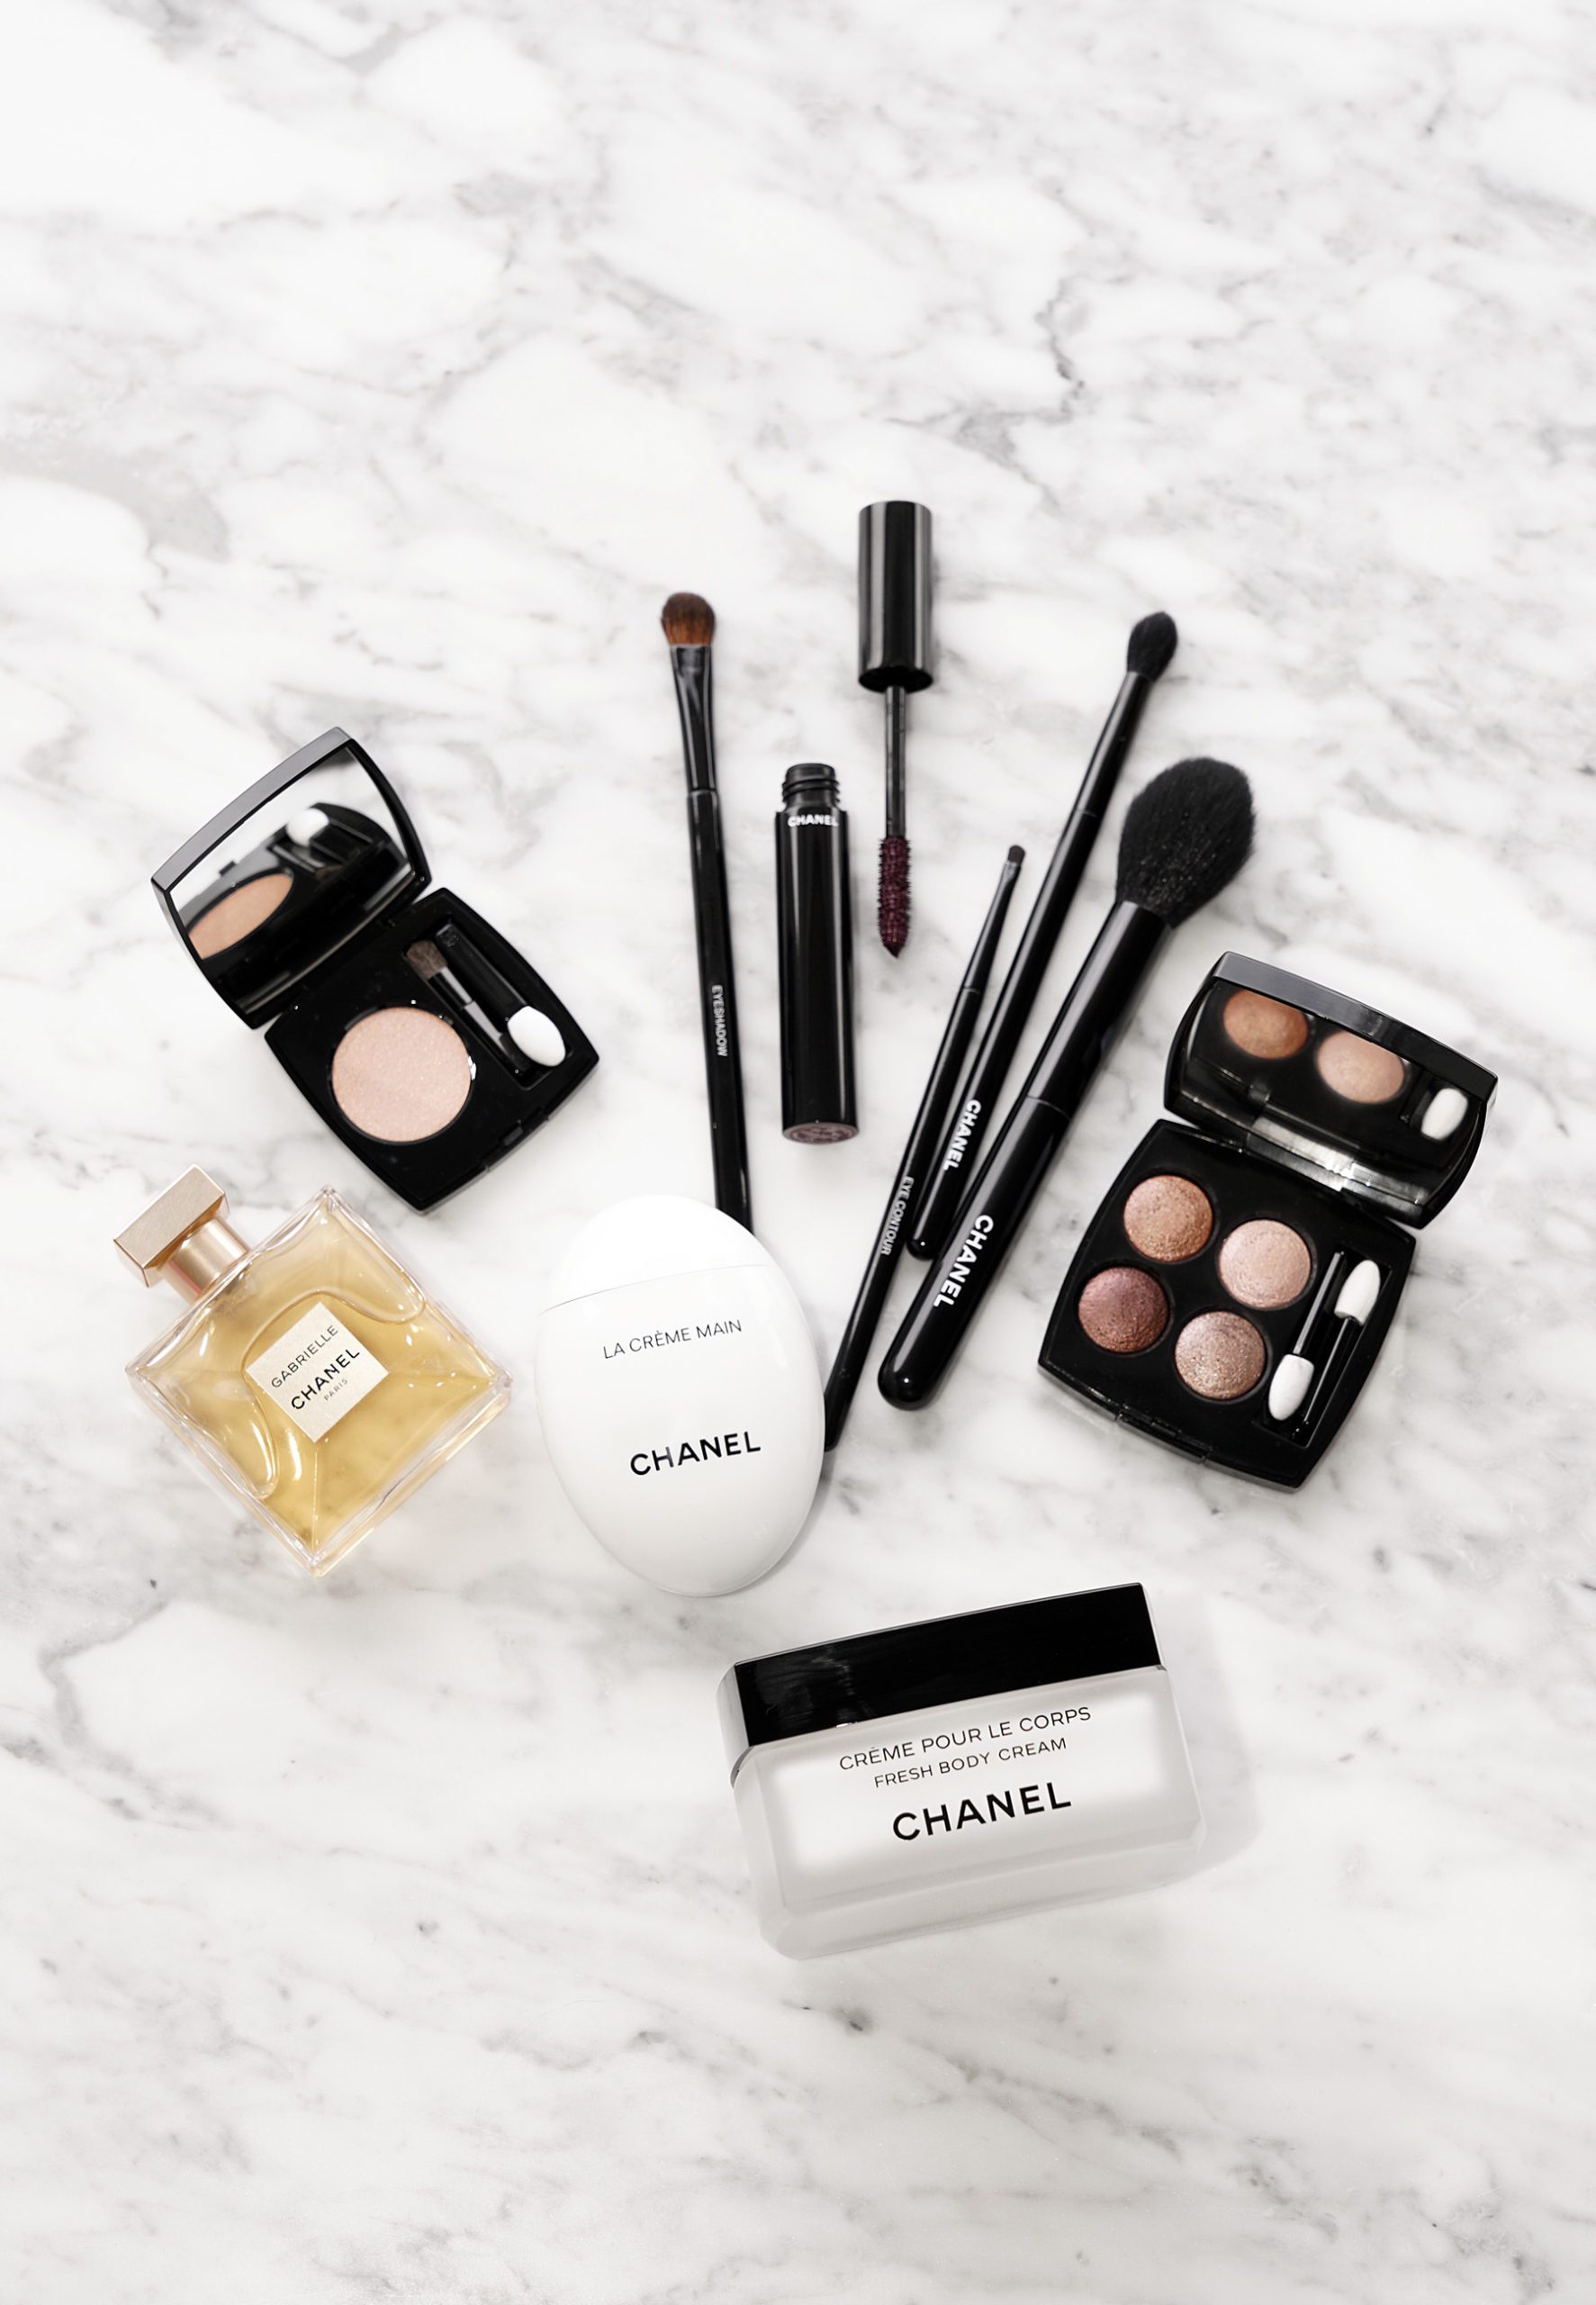 10 Things I'm Loving From Chanel - The Beauty Look Book